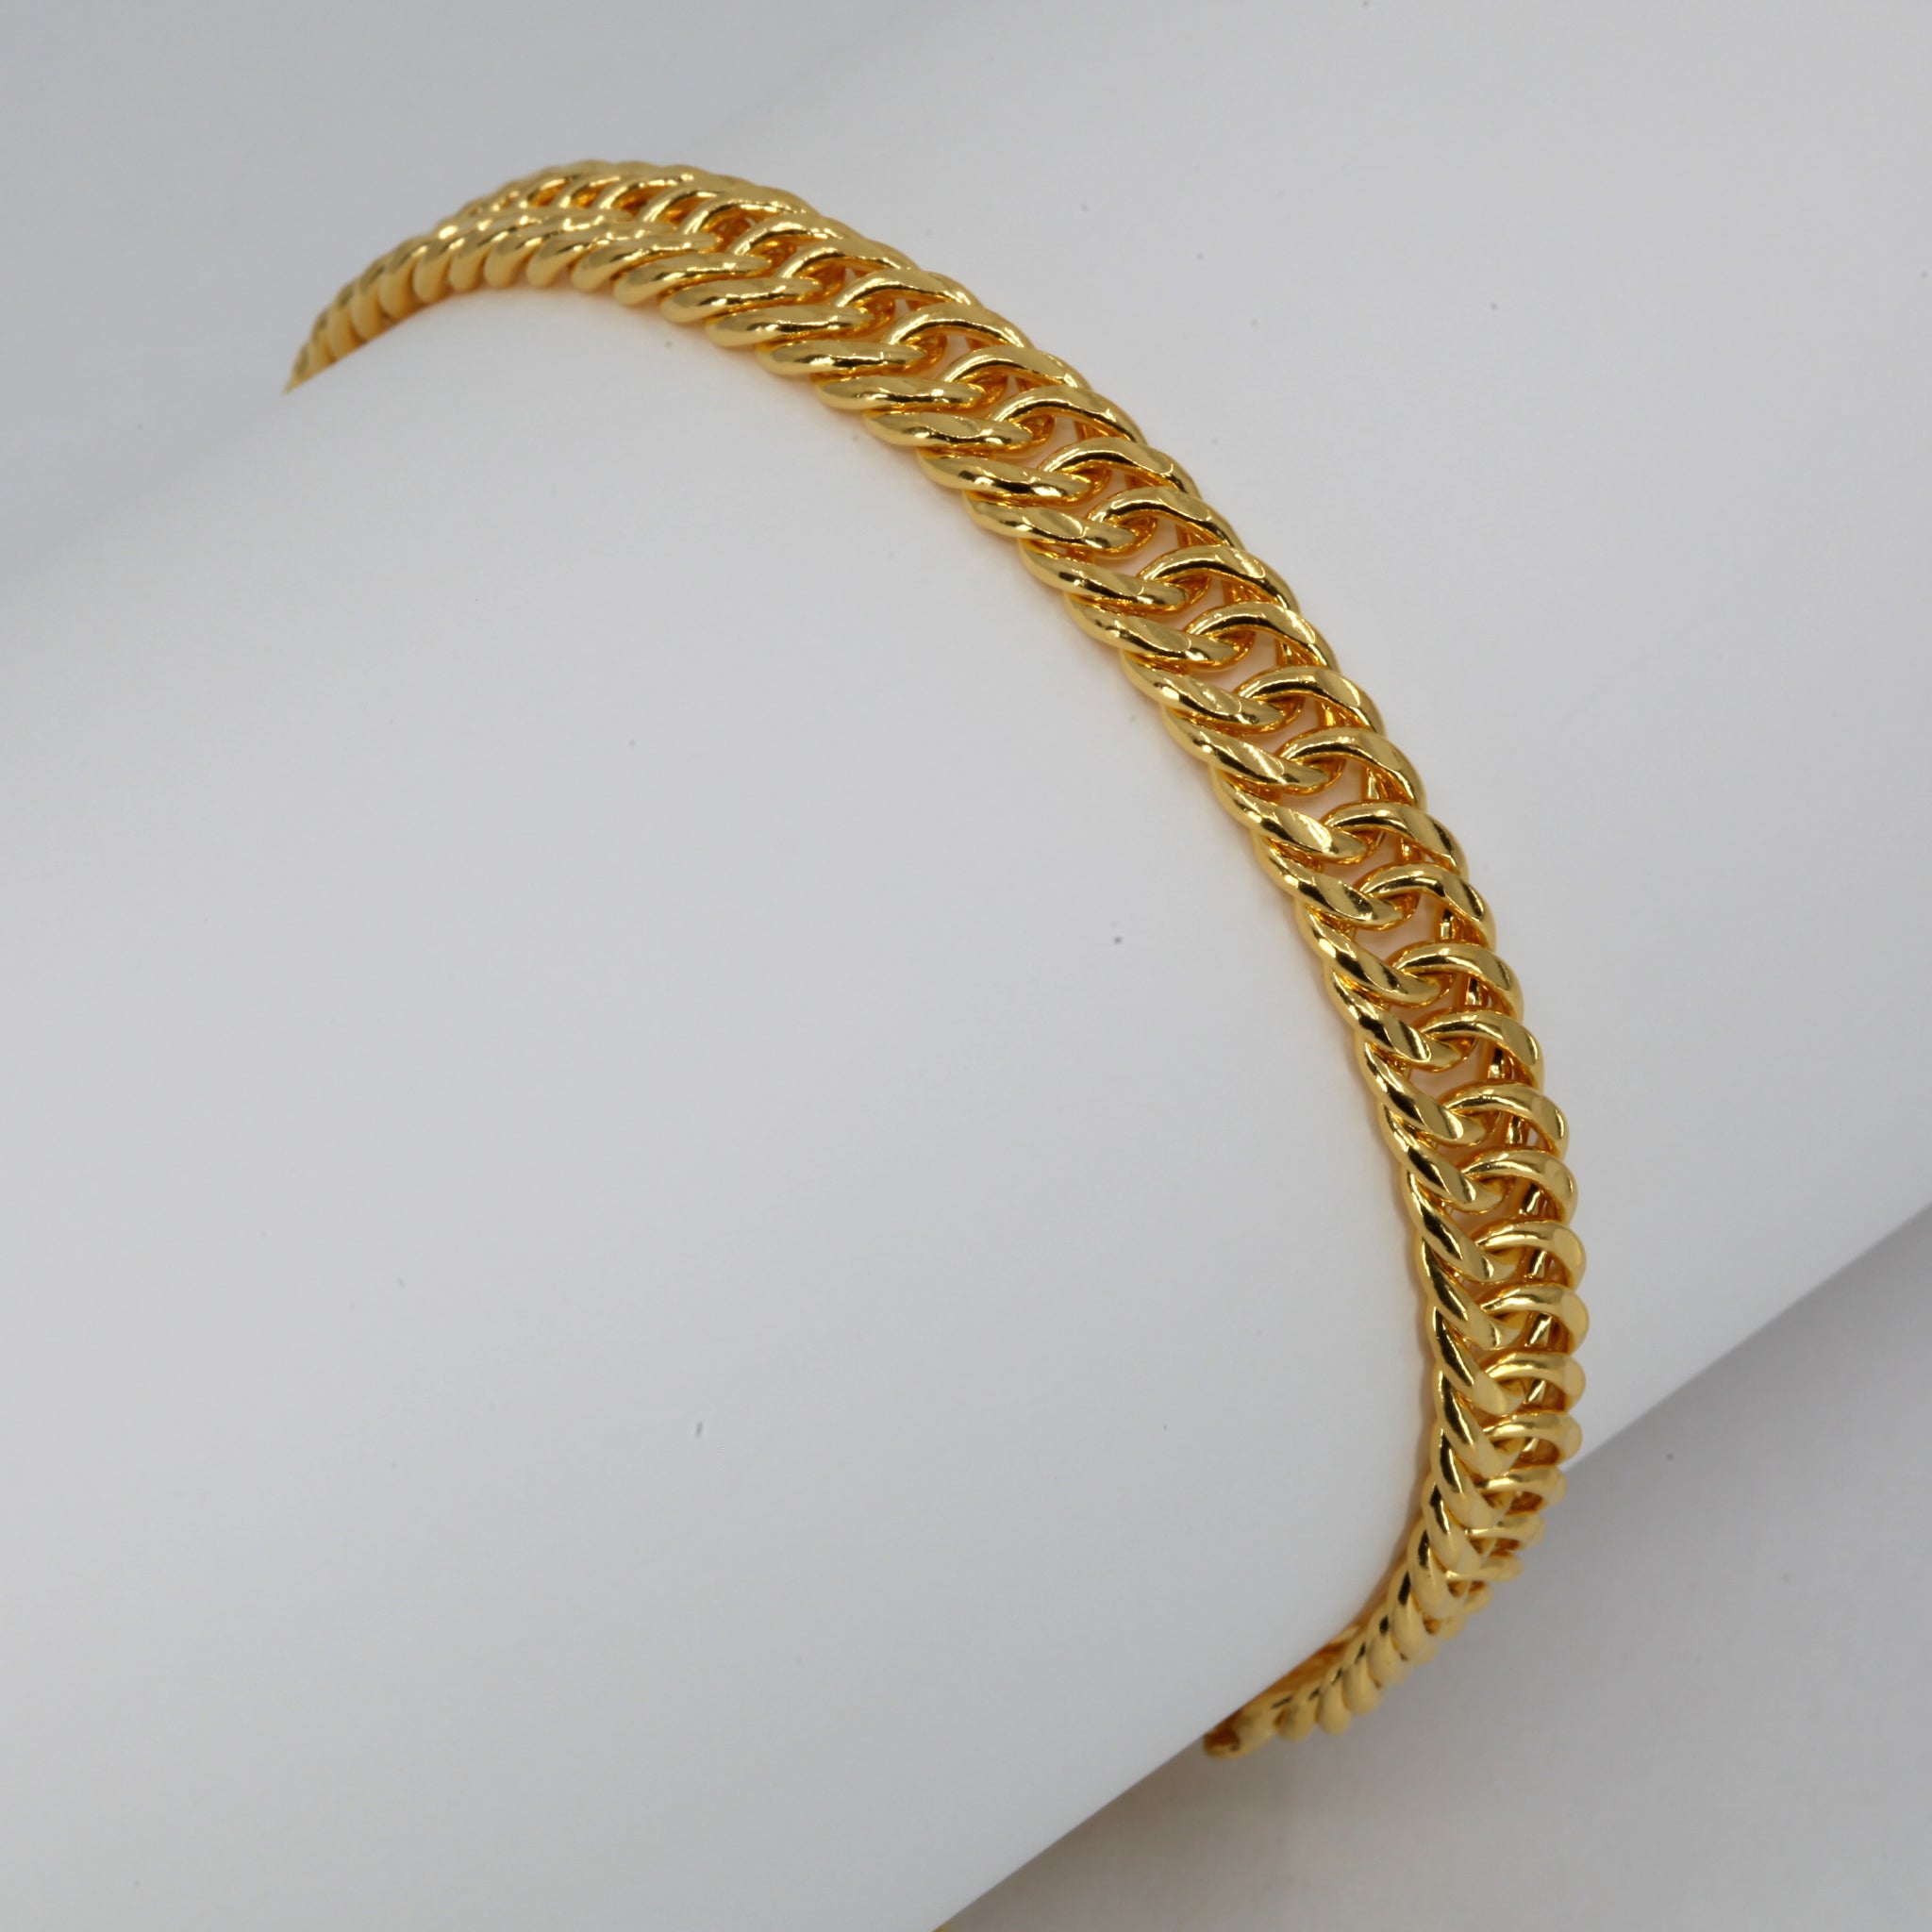 Polished Round Link 14k Yellow Gold Bracelet 8 Inches